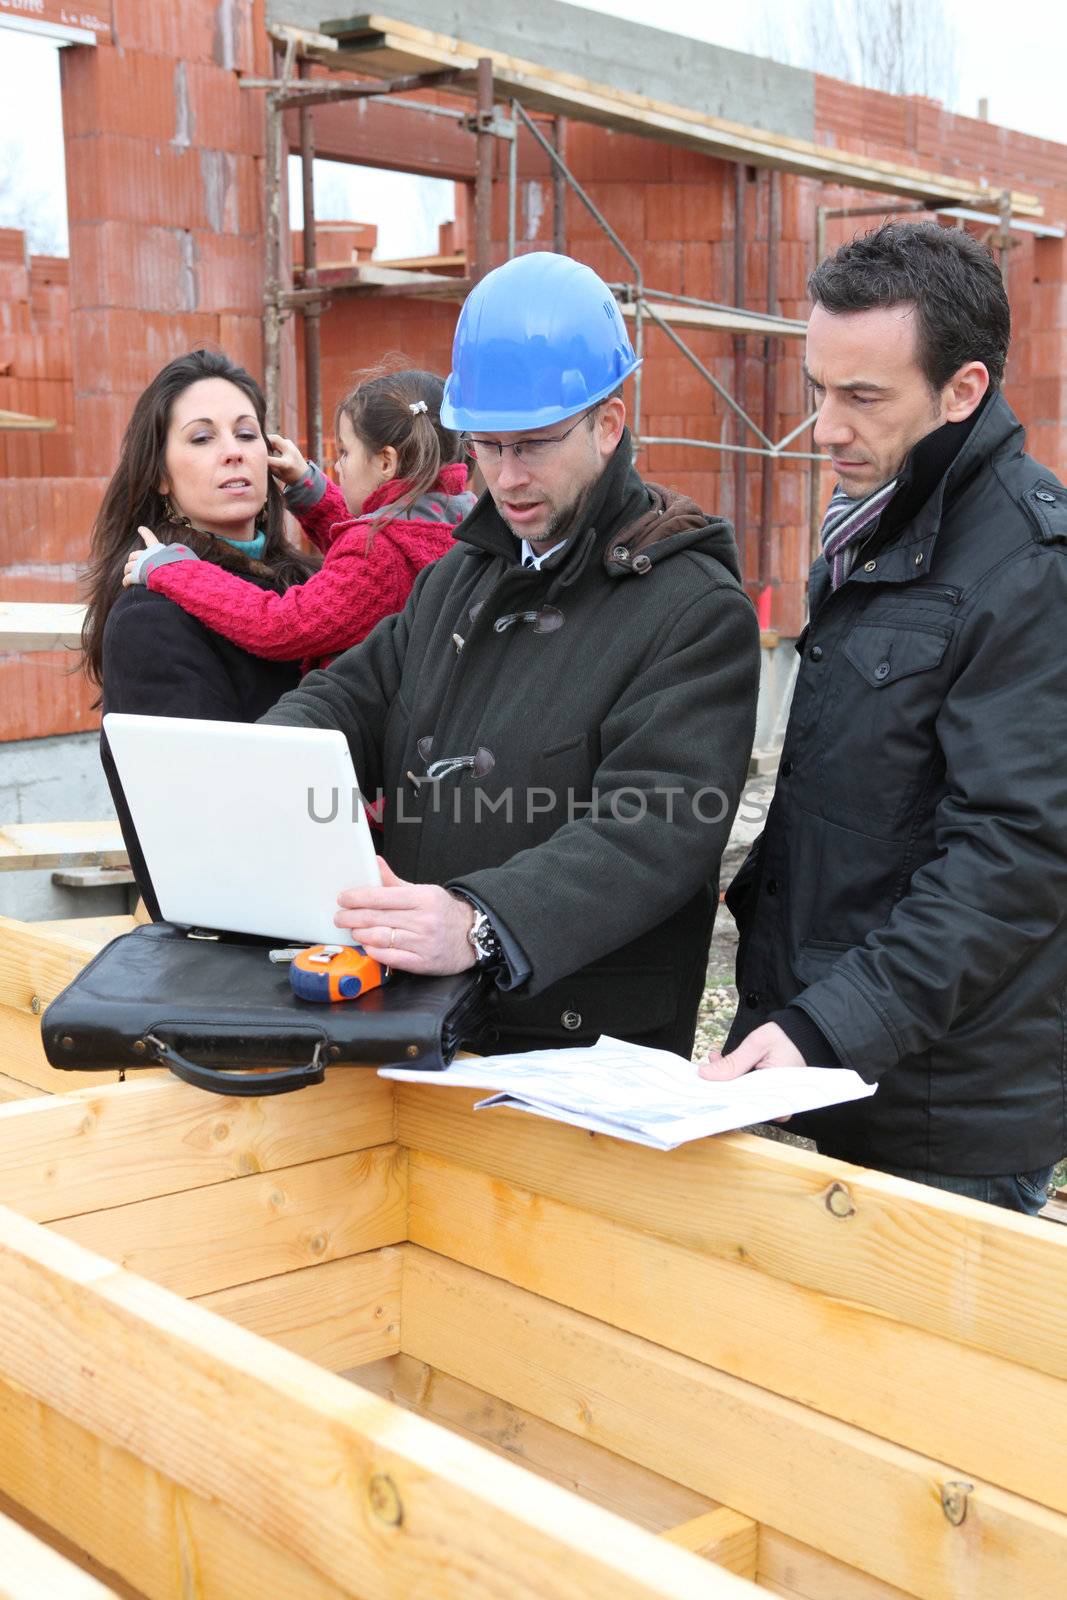 Family inspecting there unfinished future home by phovoir